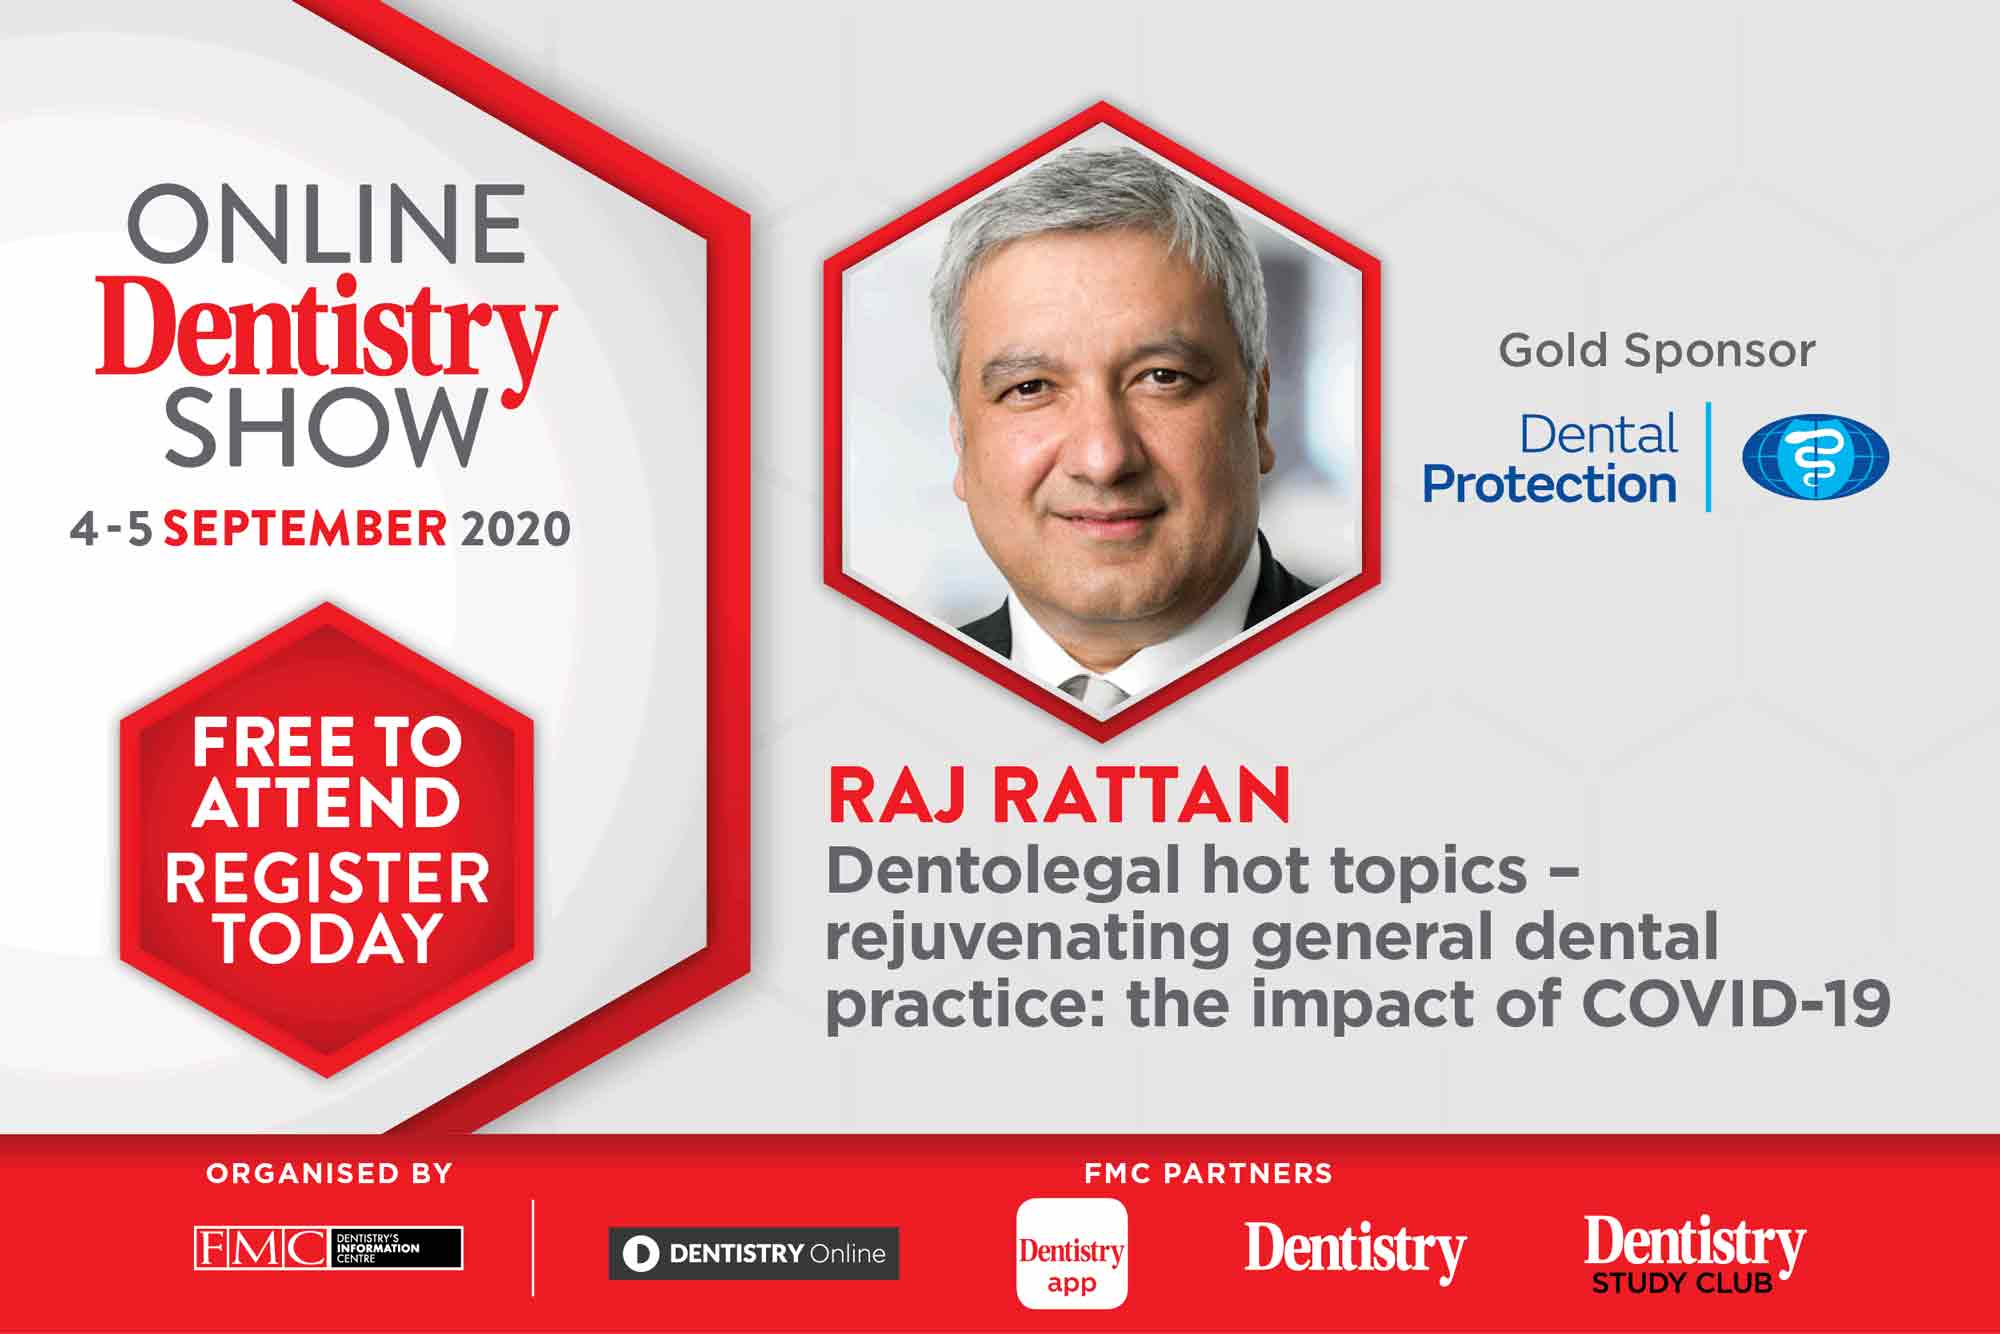 Coming this September, the Online Dentistry Show is putting on the very first virtual exhibition in UK dentistry with support from gold sponsors, Dental Protection